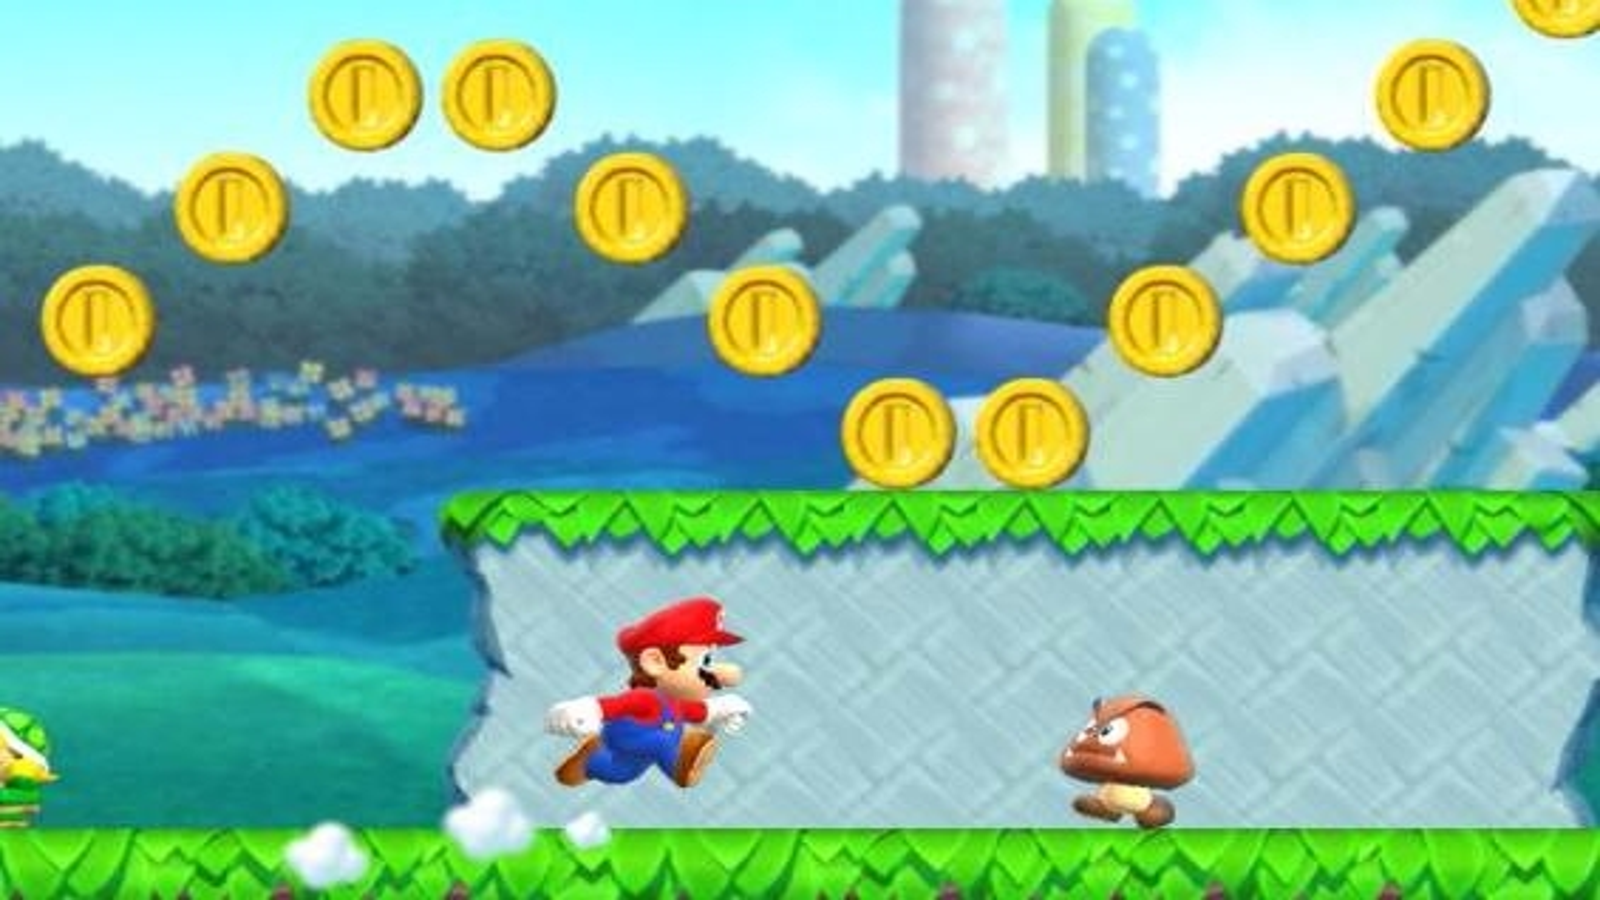 Nintendo is ruining Super Mario Run with its online requirement